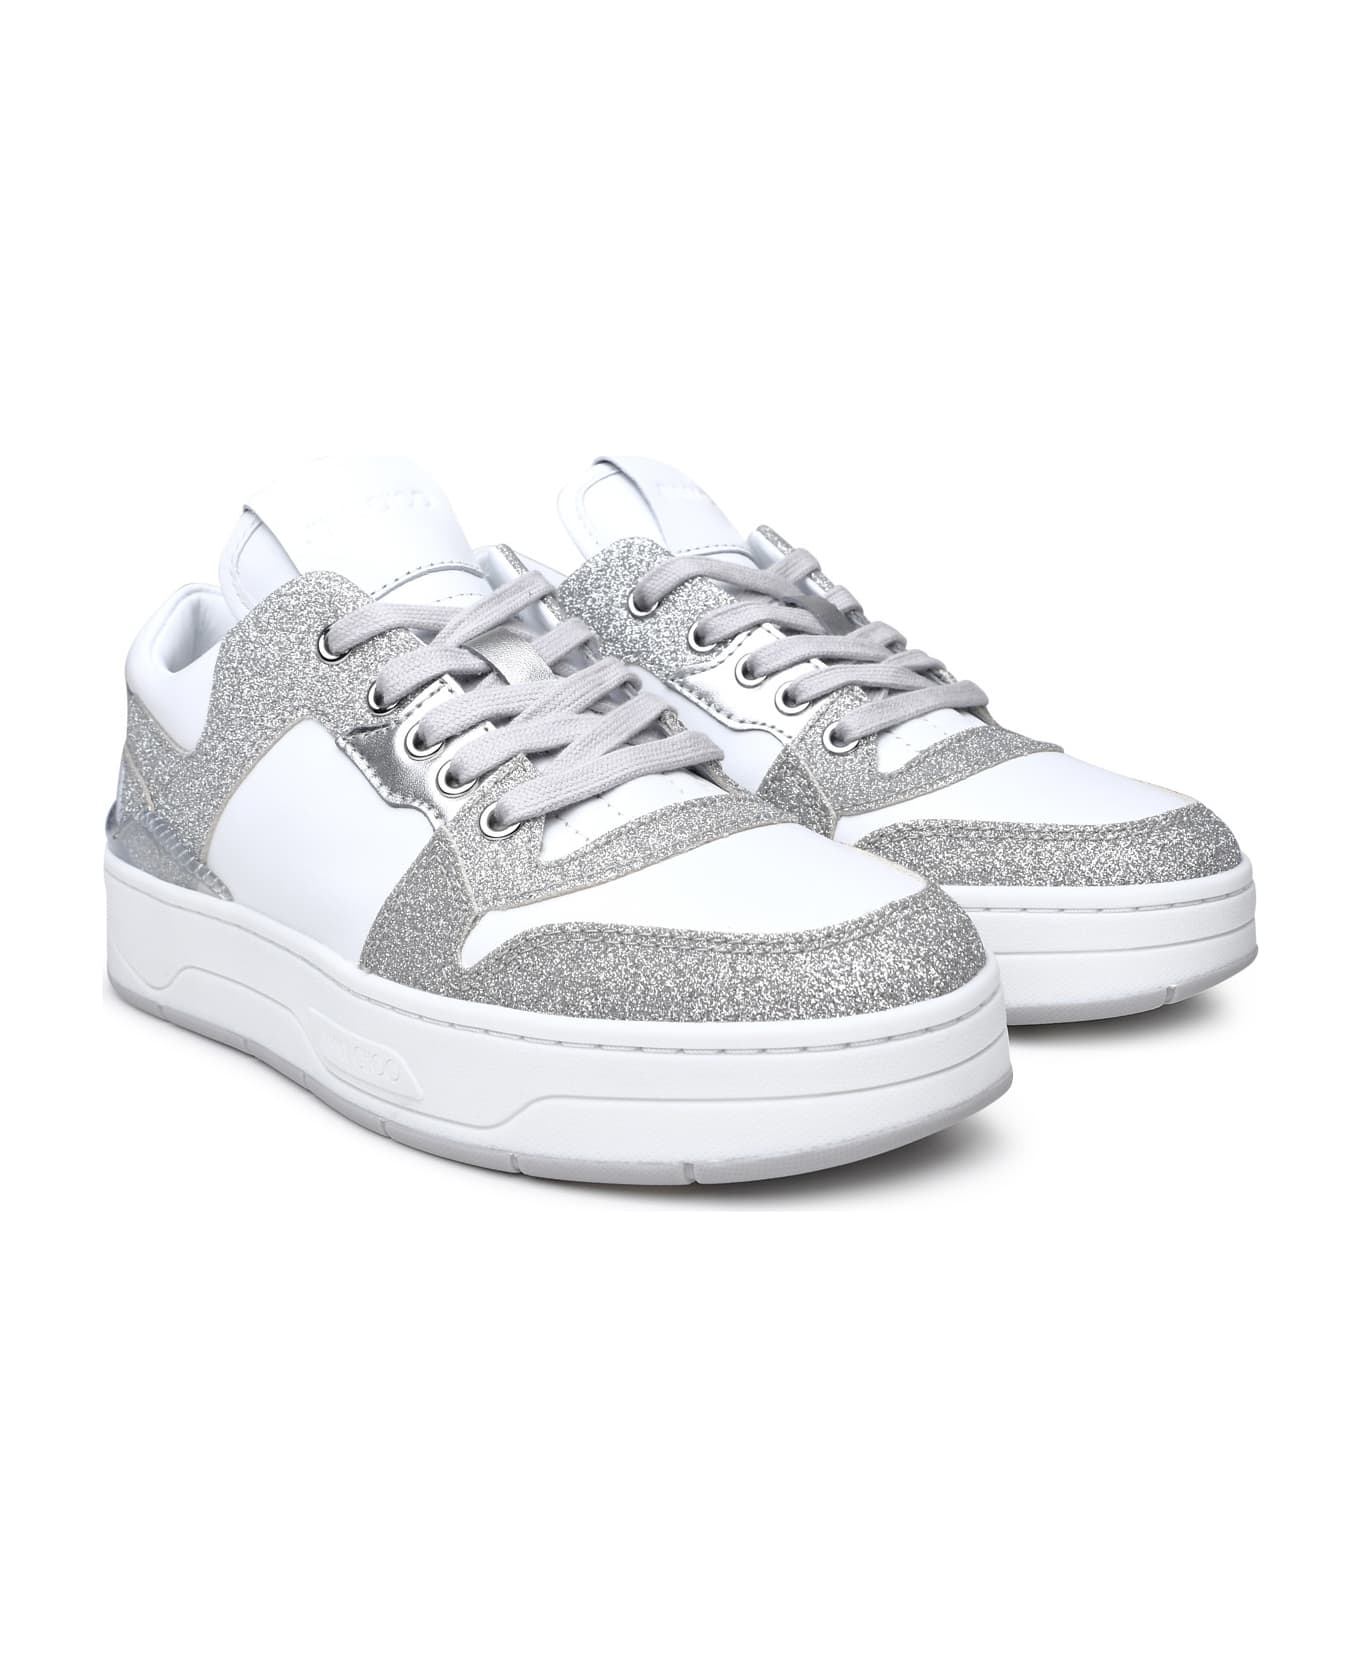 Jimmy Choo Cashmere White chie Sneakers - White